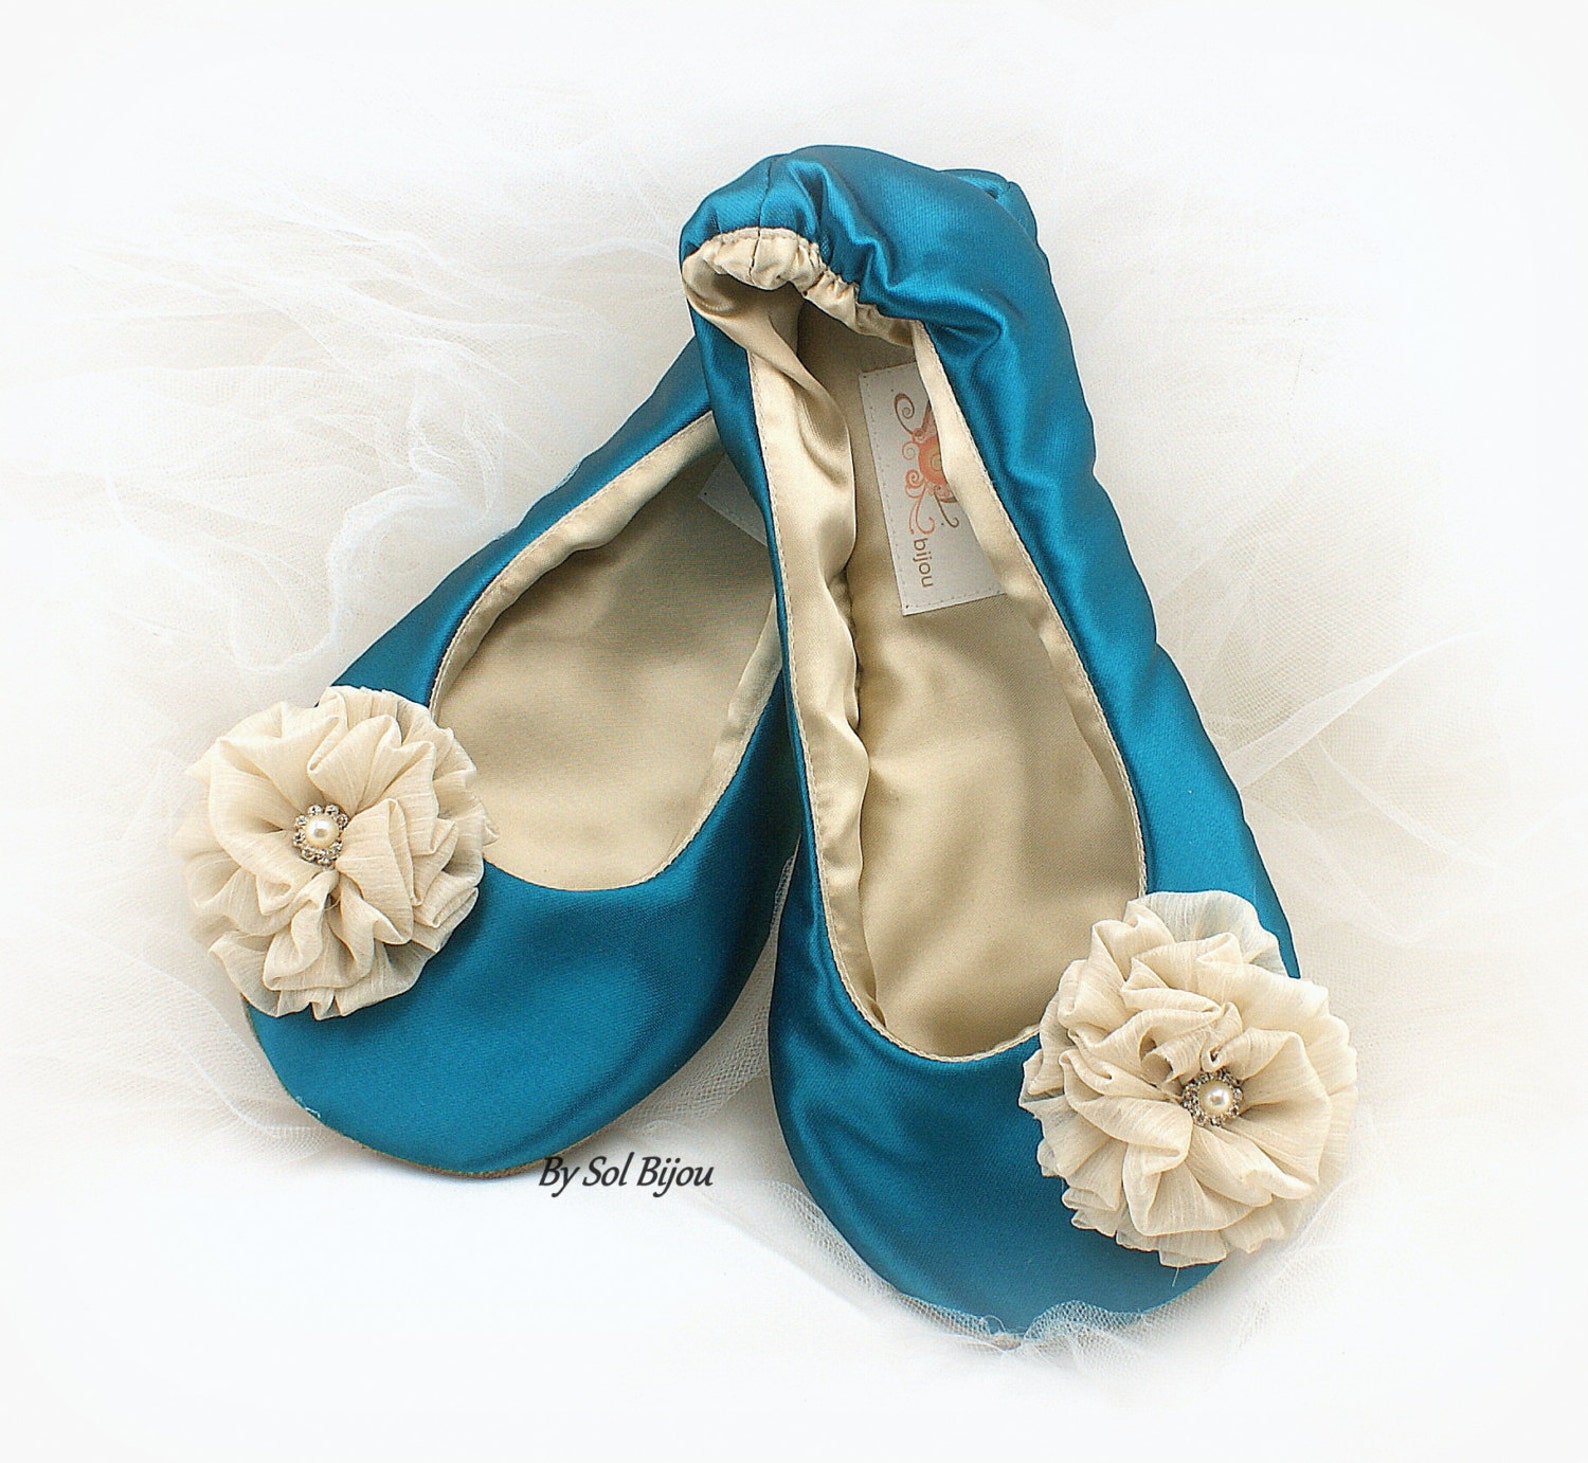 teal and gold wedding ballet flats, teal ballet shoes, turquoise wedding flats shoes, teal satin bridal flats